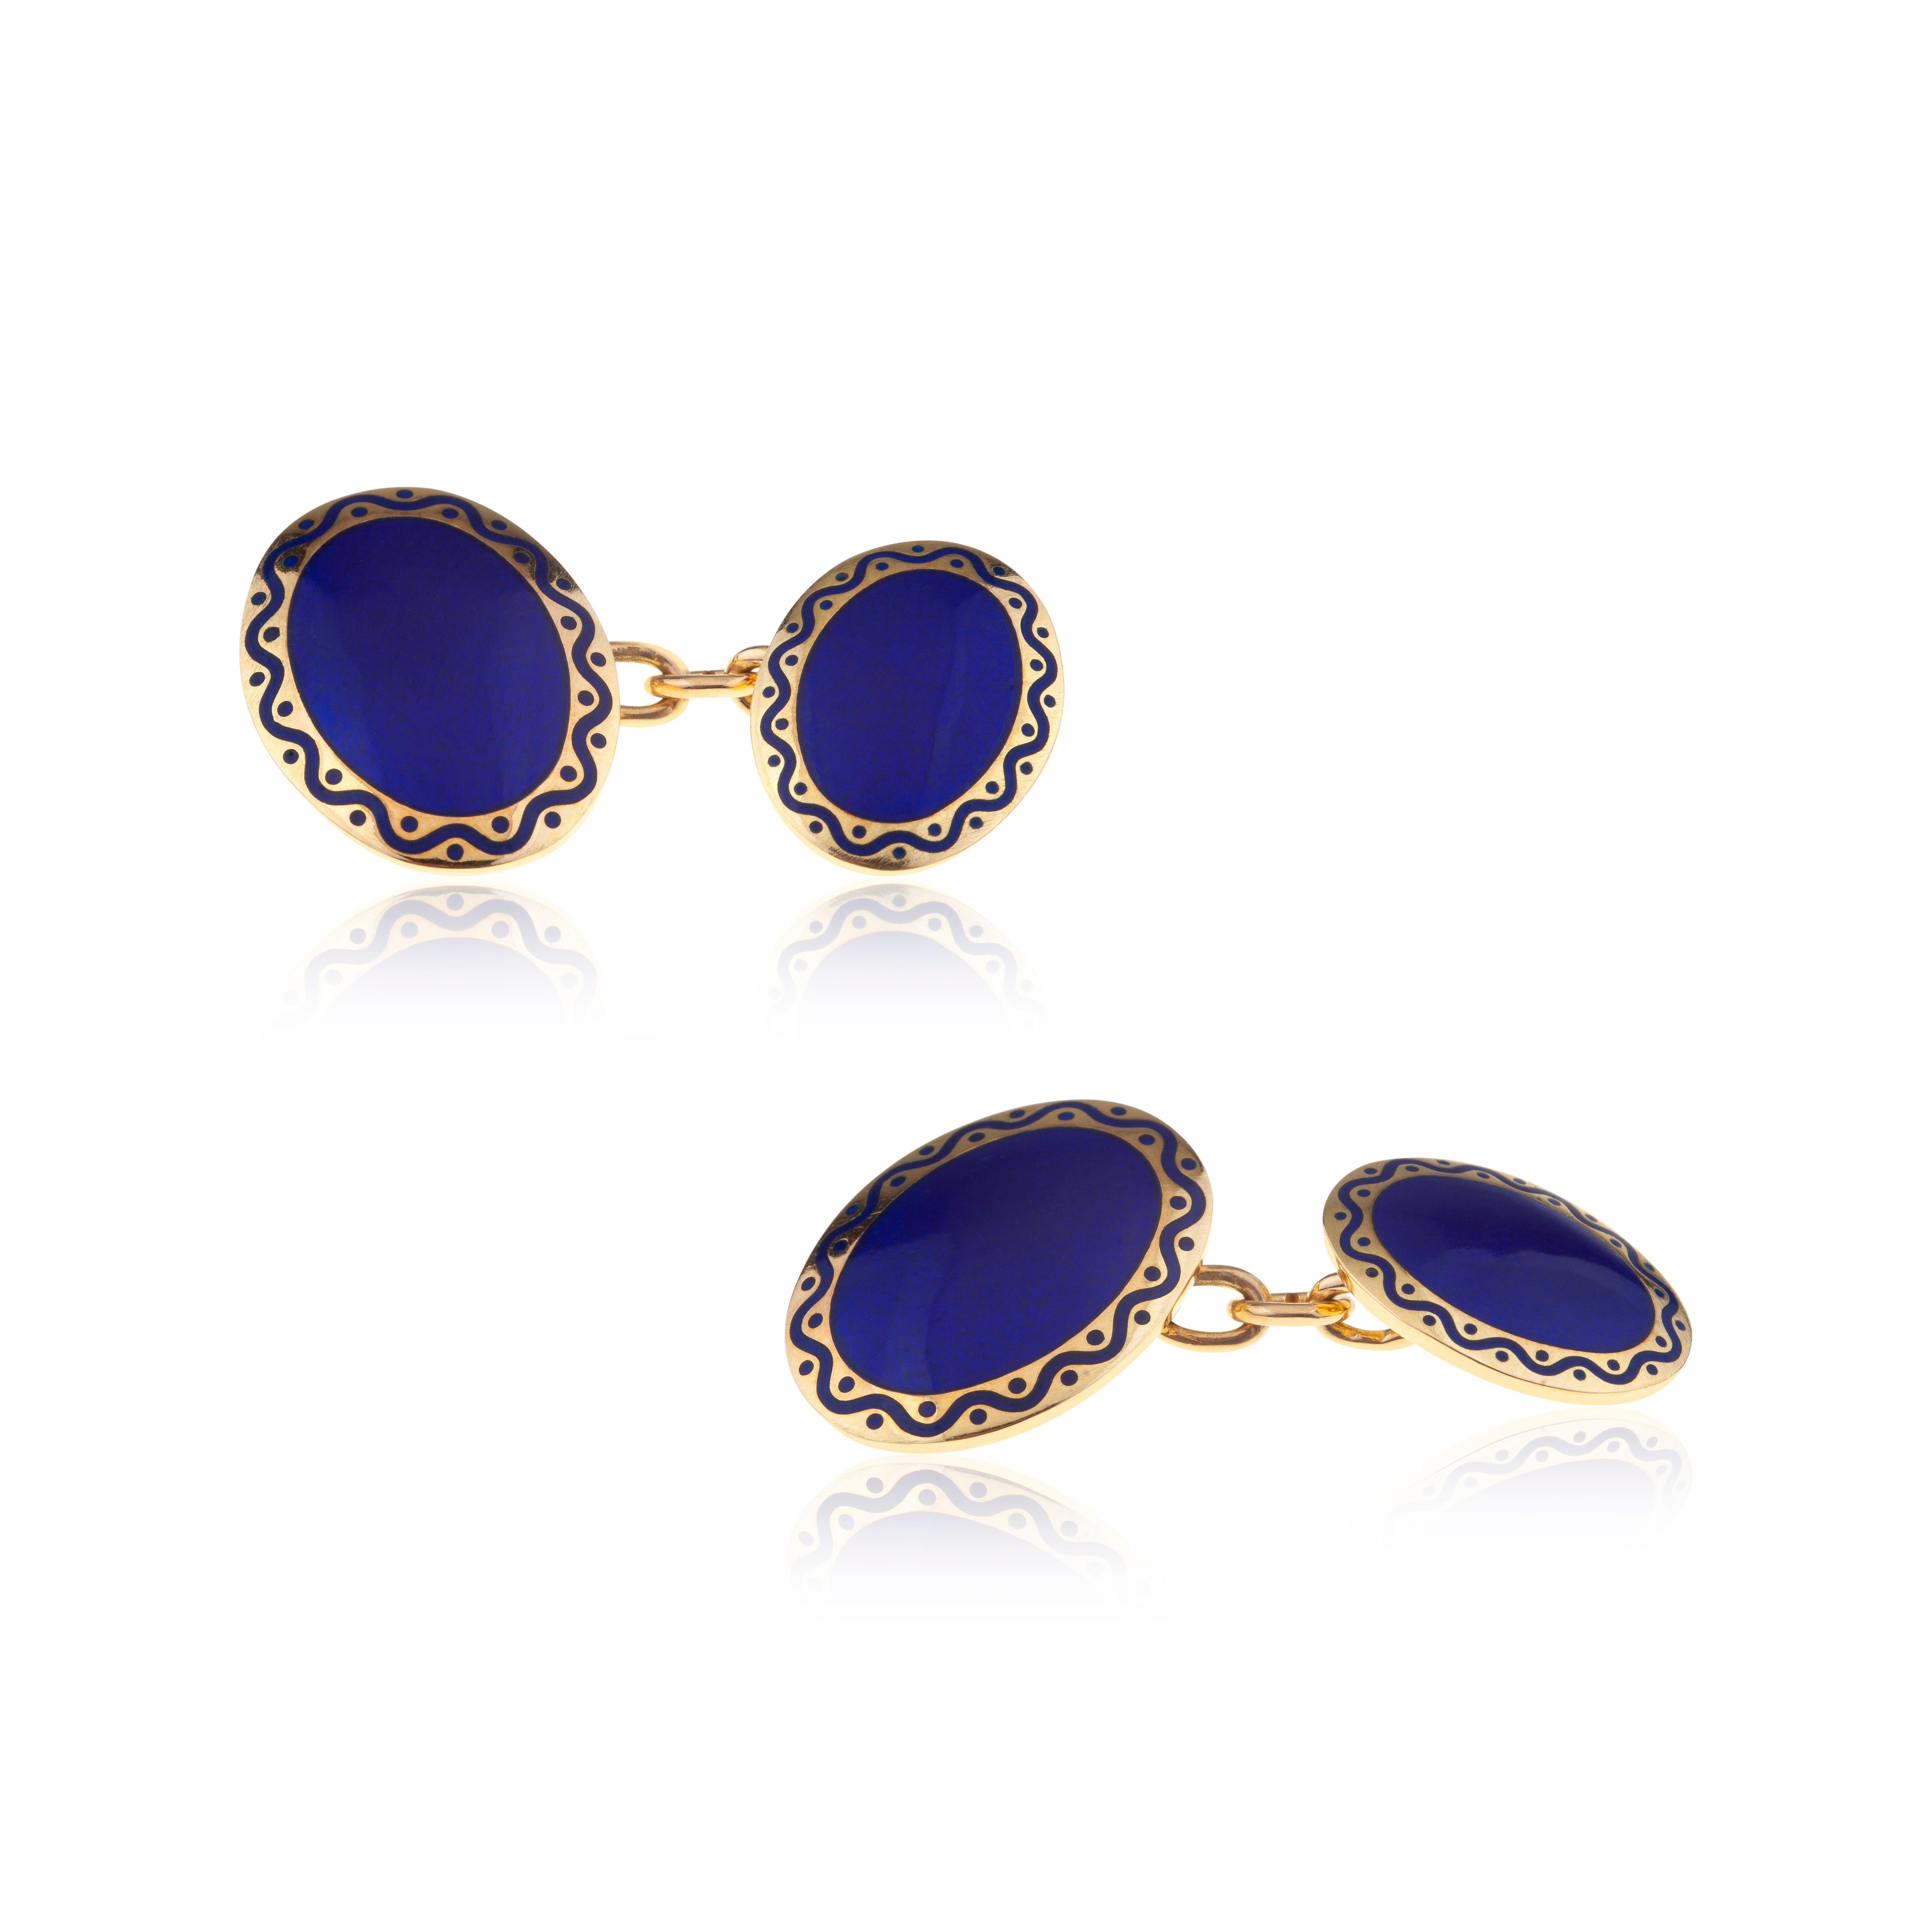 Cufflinks Oval 18kt Gold with Blue Enamel.
Evergreen Cufflinks for Business or Leisure Time to be worn on white, light blue or stripe Cuff Shirts.  
Blue Enamel decoration on both oval pieces, on the smaller and the larger, back and front.  
The